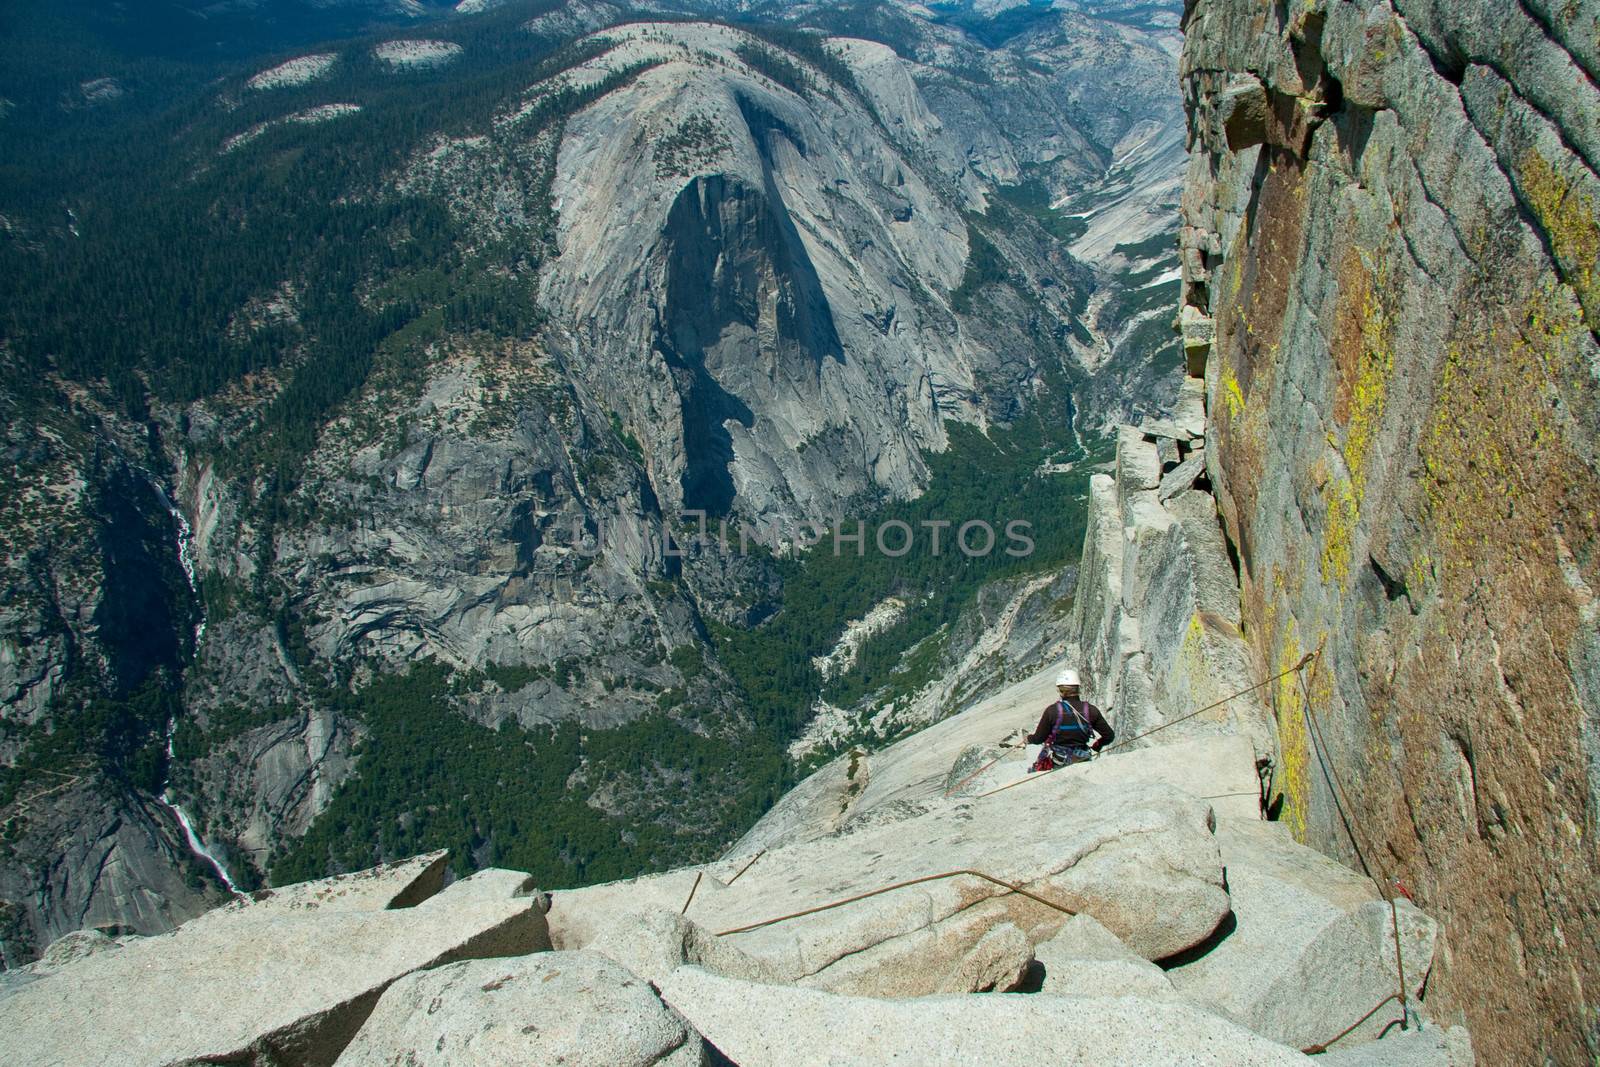 A climber on the Half Dome in the Yosemite National Park, California.